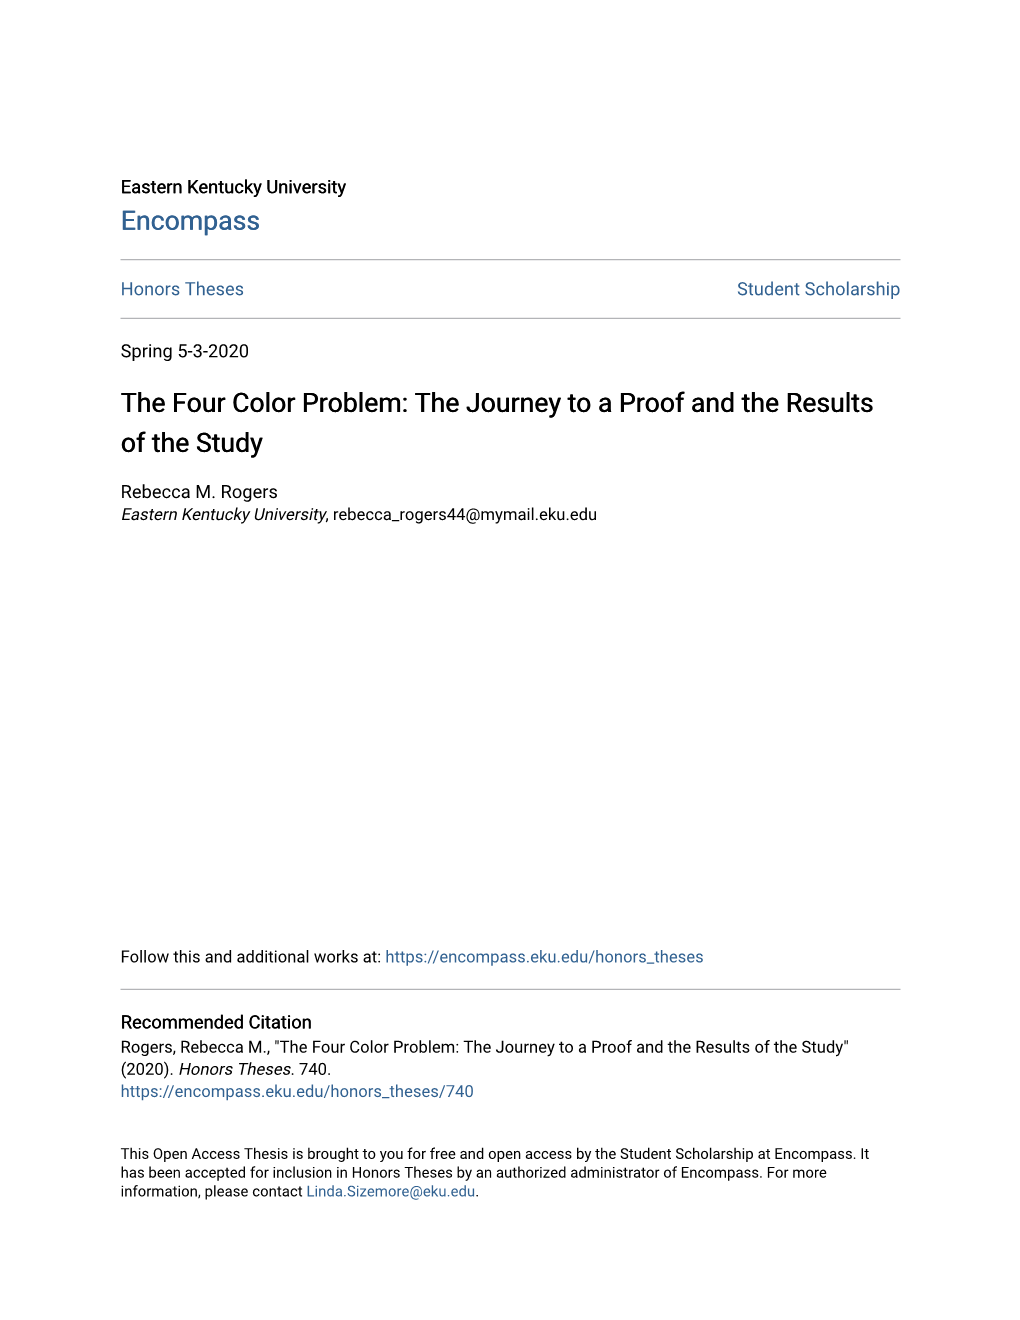 The Four Color Problem: the Journey to a Proof and the Results of the Study